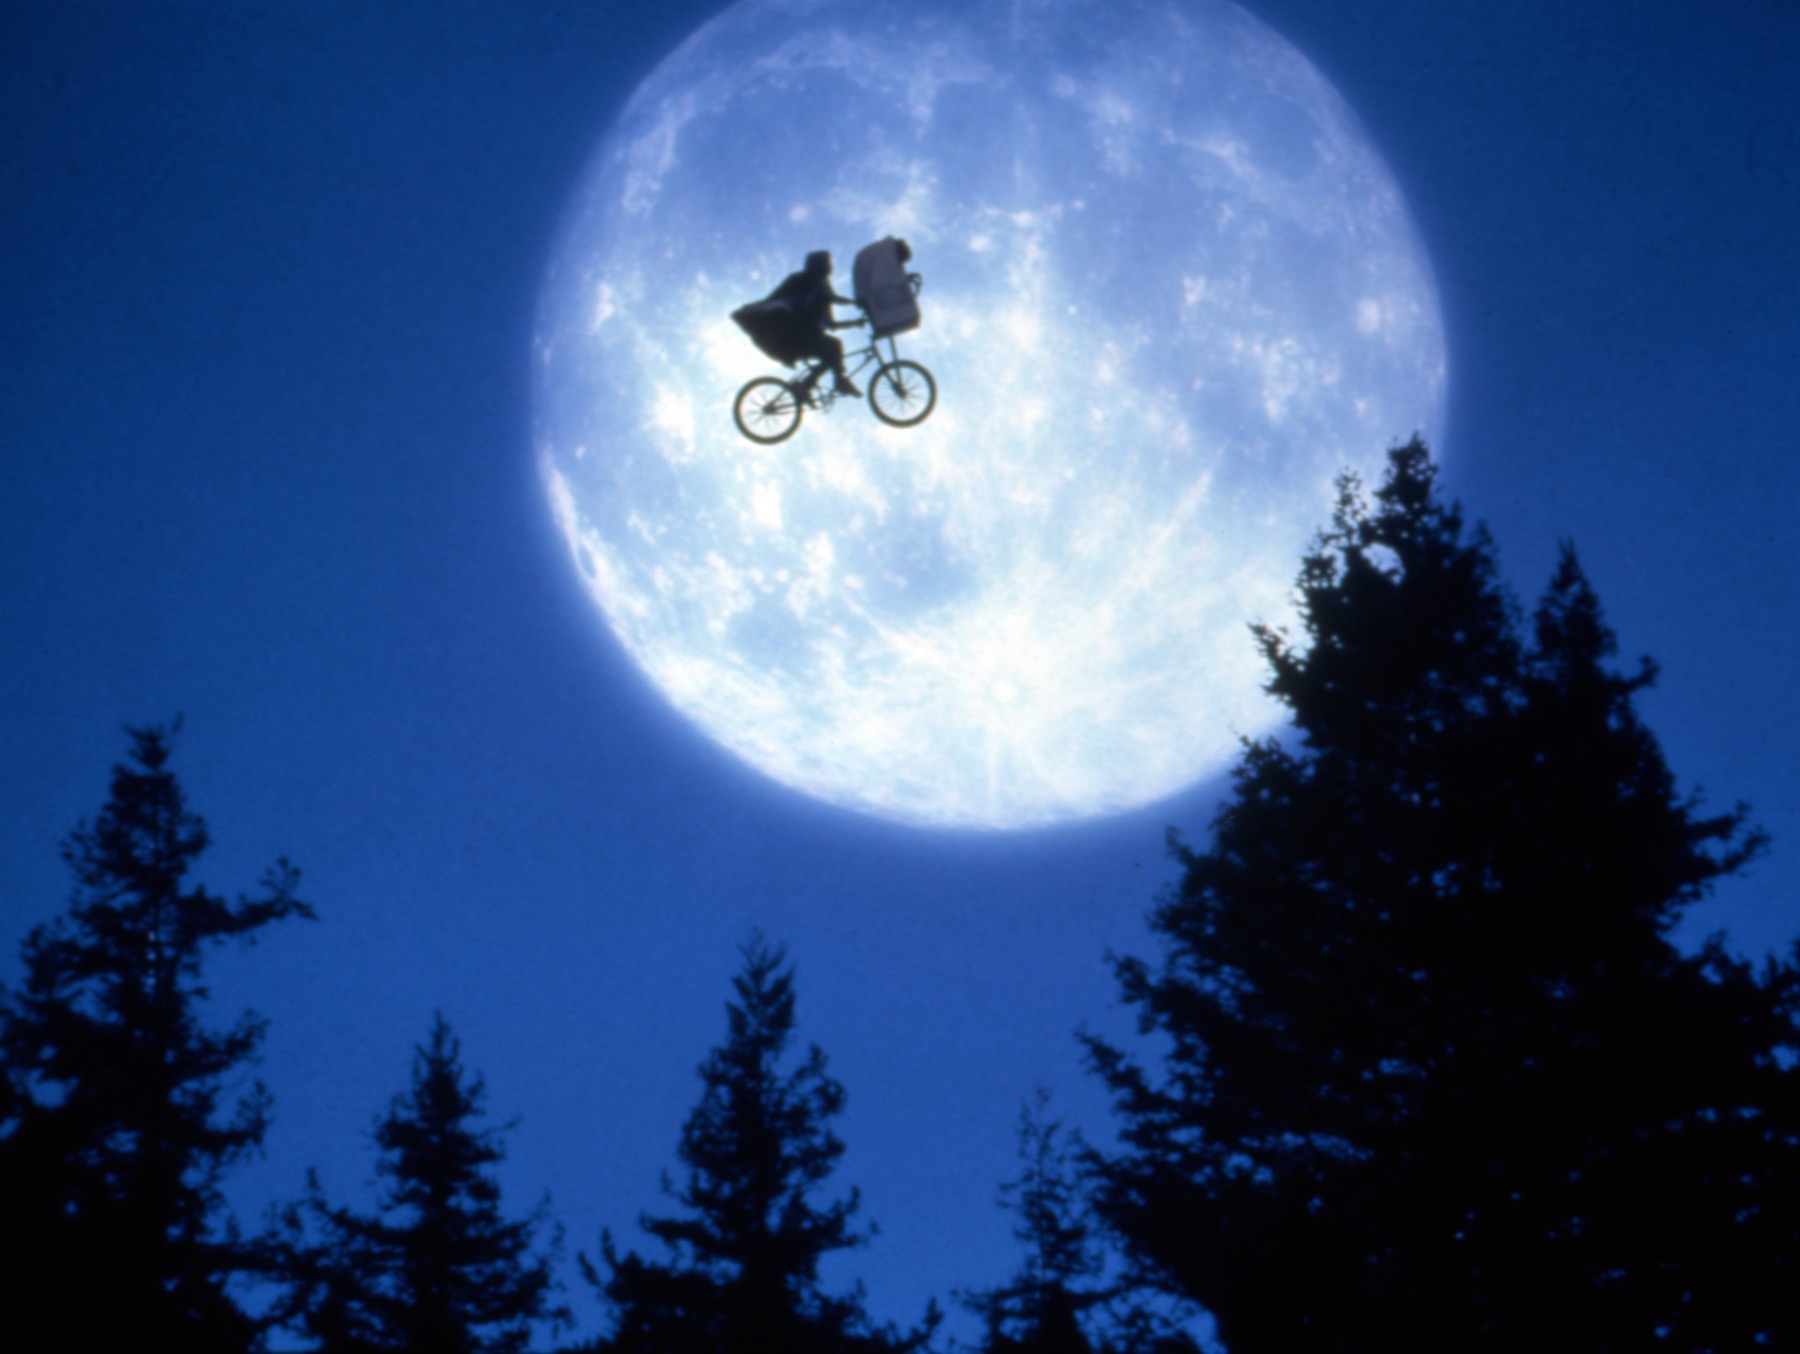 E.T.' phones home 40 years later – The Varsity Cinema